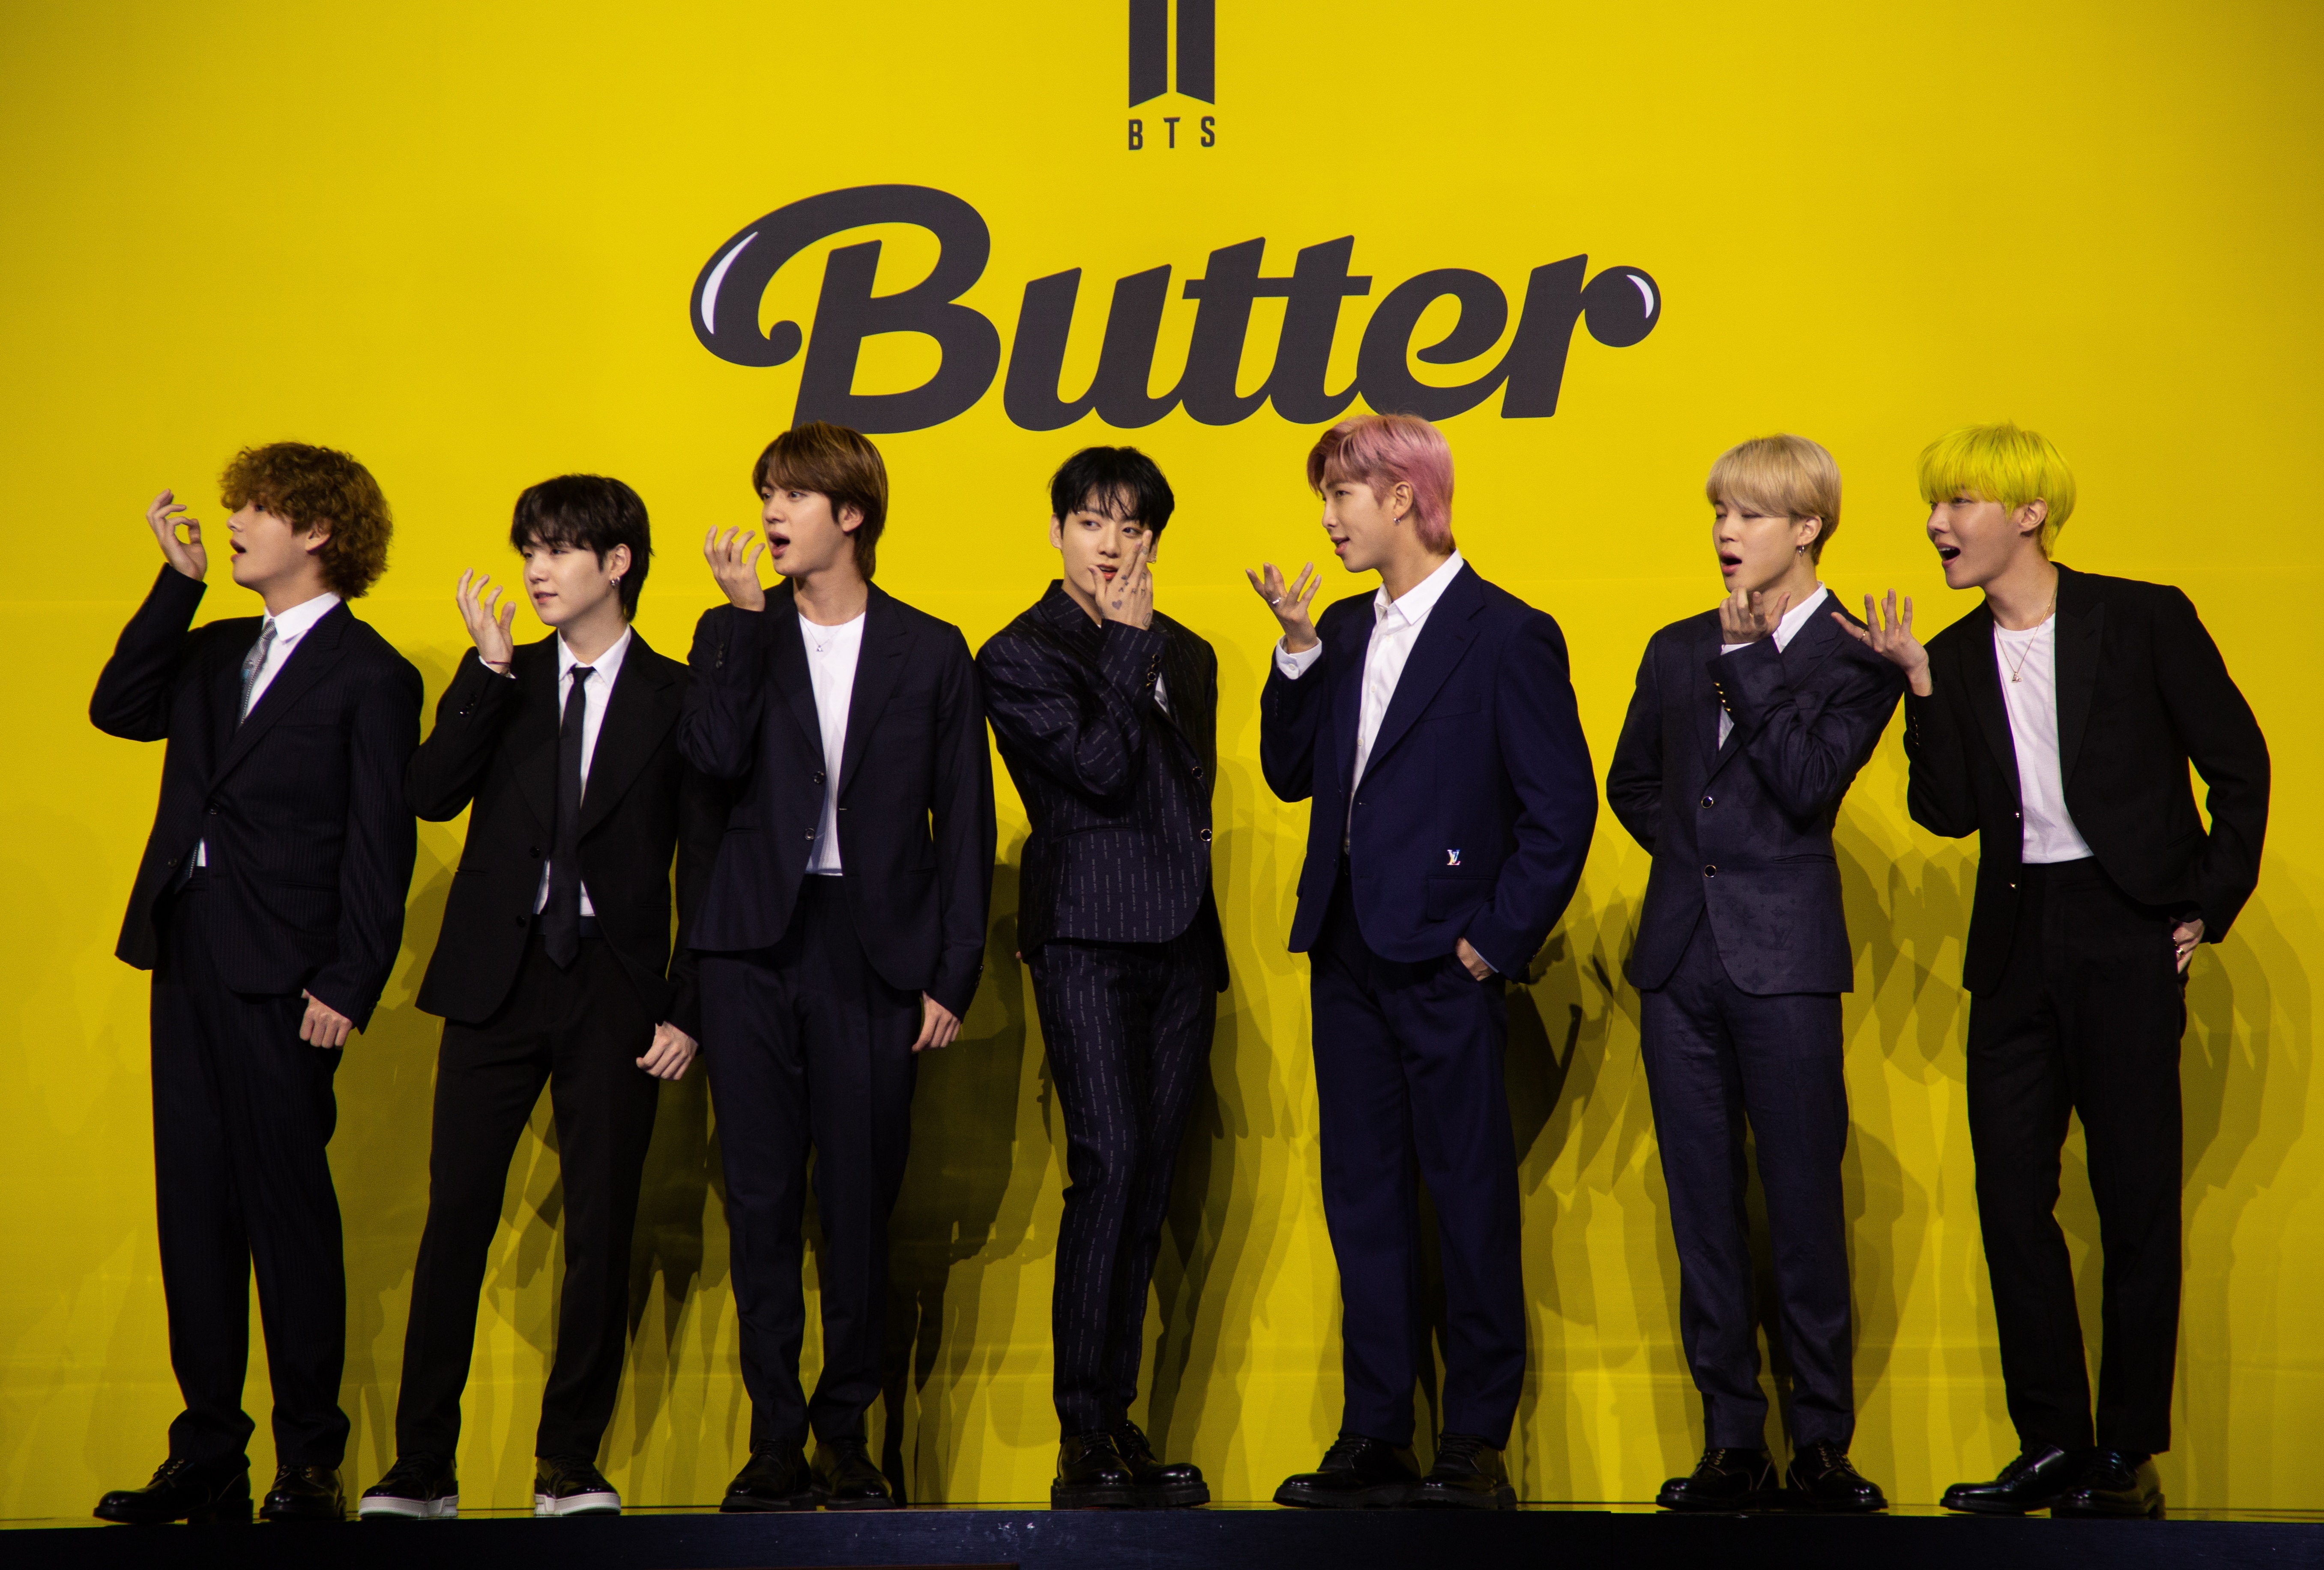 Seoul (Korea, Republic Of).- (FILE) - (L-R) V, Suga, Jin, Jung Kook, RM, Jimin and J-hope, members of South Korean boy band Bangtan Boys (BTS), pose as they arrive for the launch of their new digital single album 'Butter' at Olympic Hall on Olympic Park in Seoul, South Korea, 21 May 2021 (reissued 25 December 2021). Three members of the K-pop group BTS, Suga, RM and Jin, have tested positive for COVID-19 after returning home to South Korea following concerts in the US, the boy band's management agency said in a statement on 25 December 2021. (Corea del Sur, Seúl) EFE/EPA/JEON HEON-KYUN *** Local Caption *** 56911637